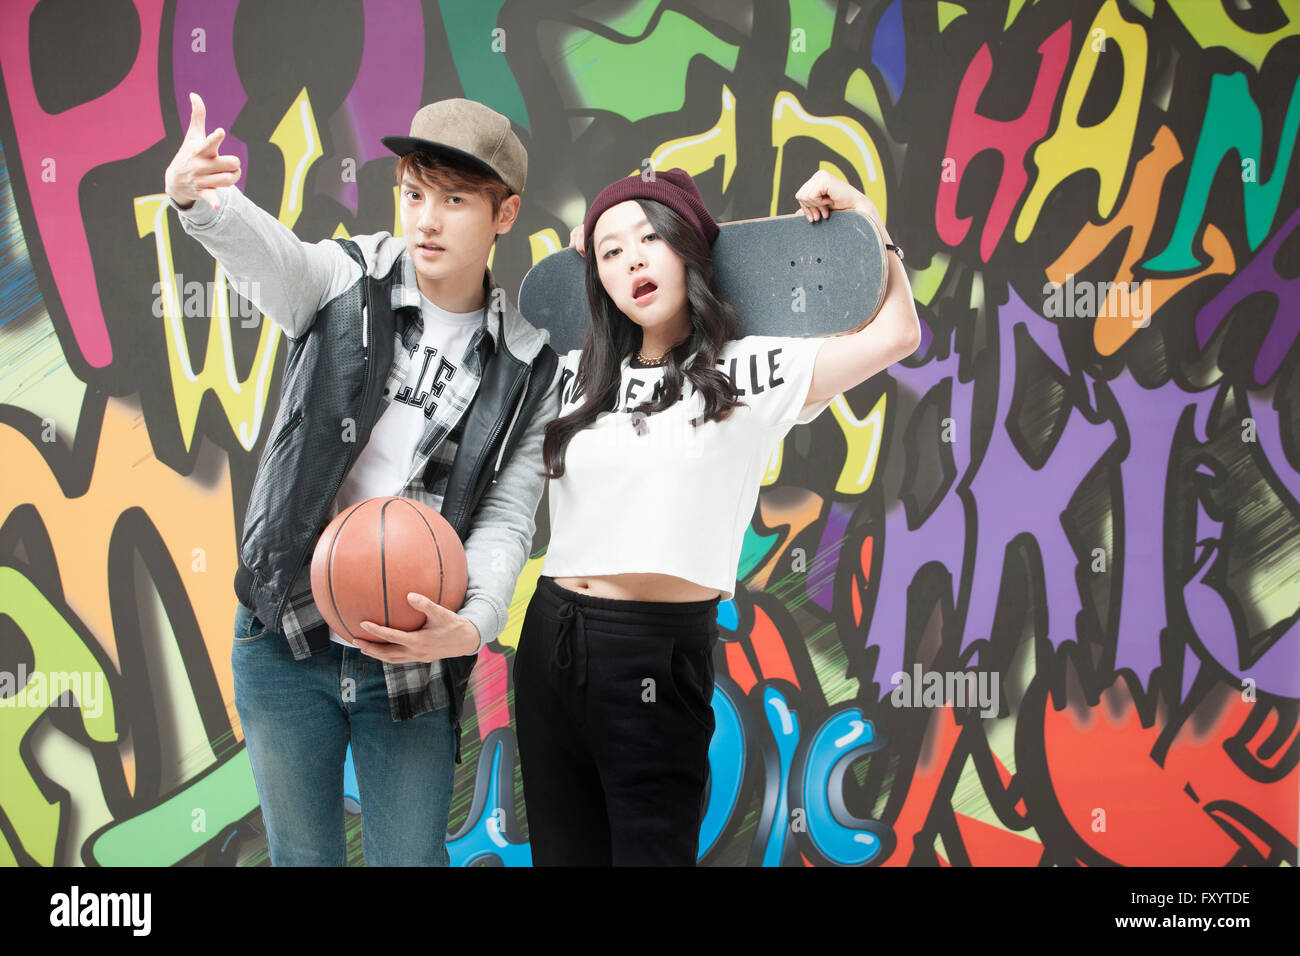 Young couple in hip-hop style holding a basketball and a skateboard against graffiti art Stock Photo